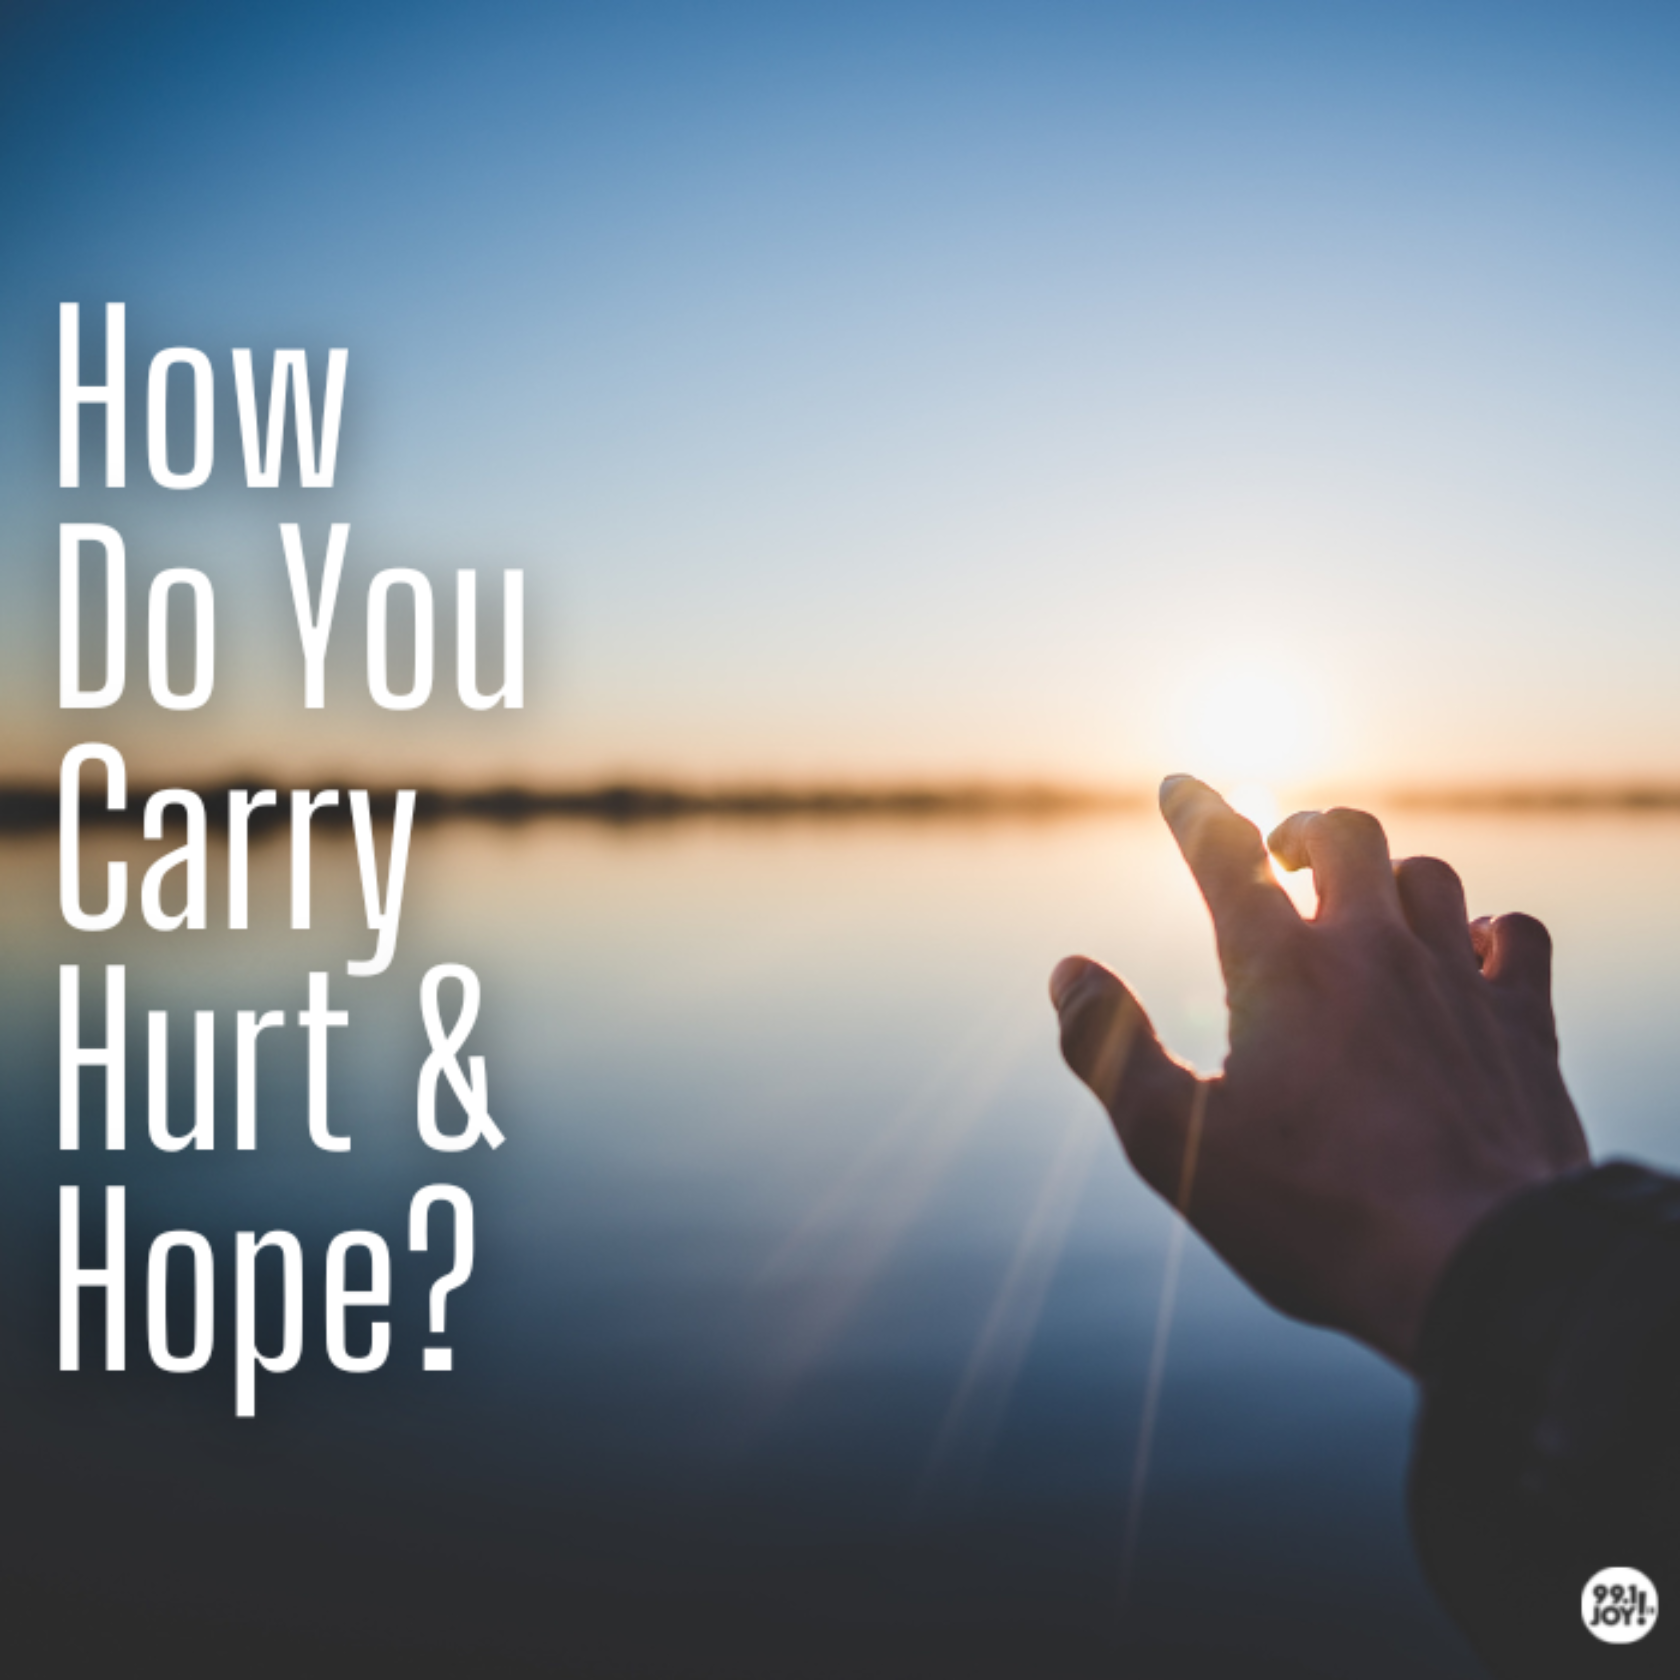 How Do You Carry Hurt and Hope?